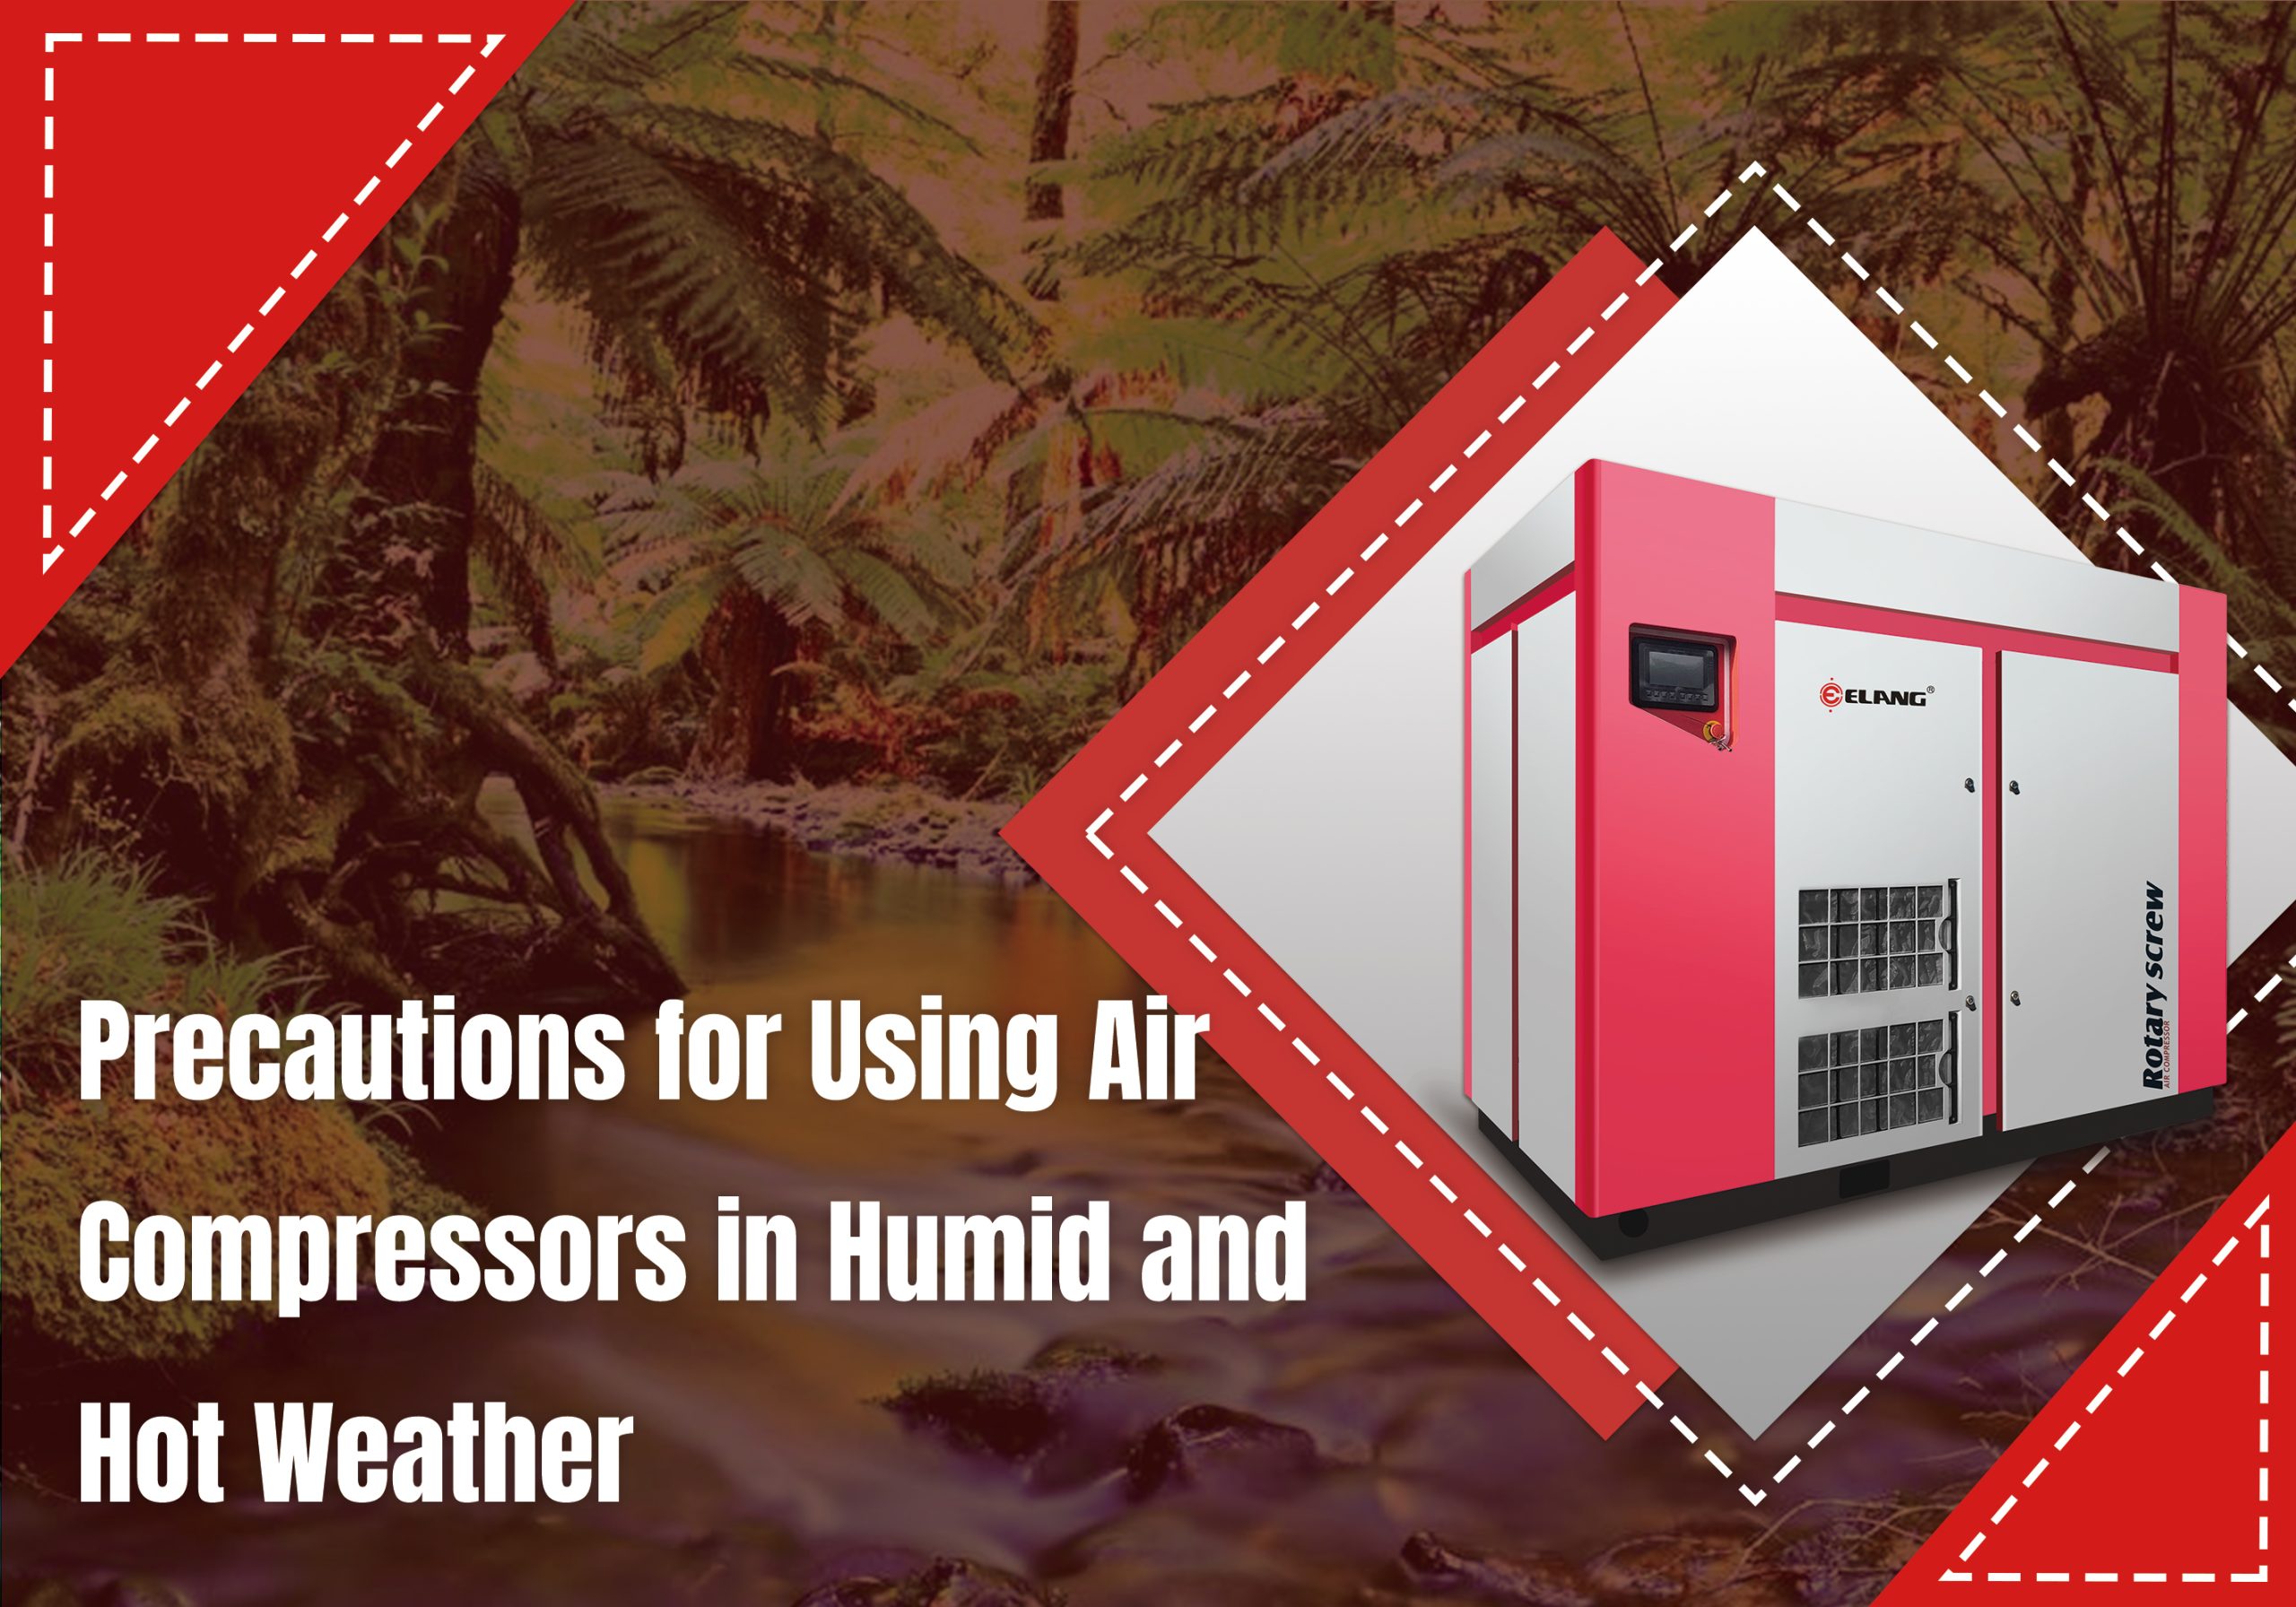 Precautions for Using Air Compressors in Humid and Hot Weather